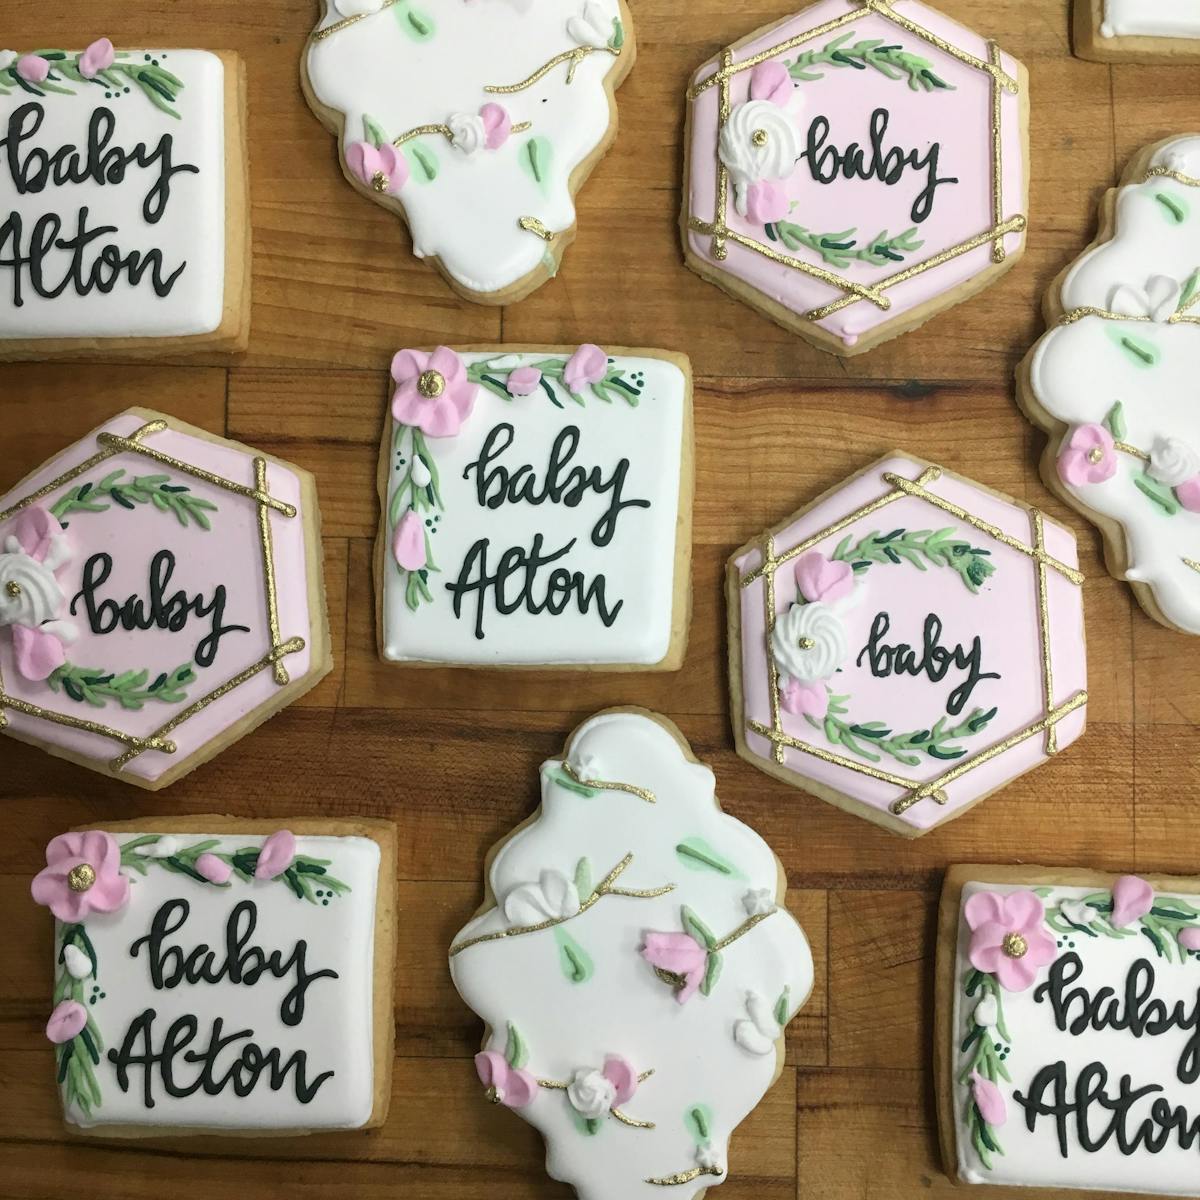 floral themed decorated cookies for baby girl shower